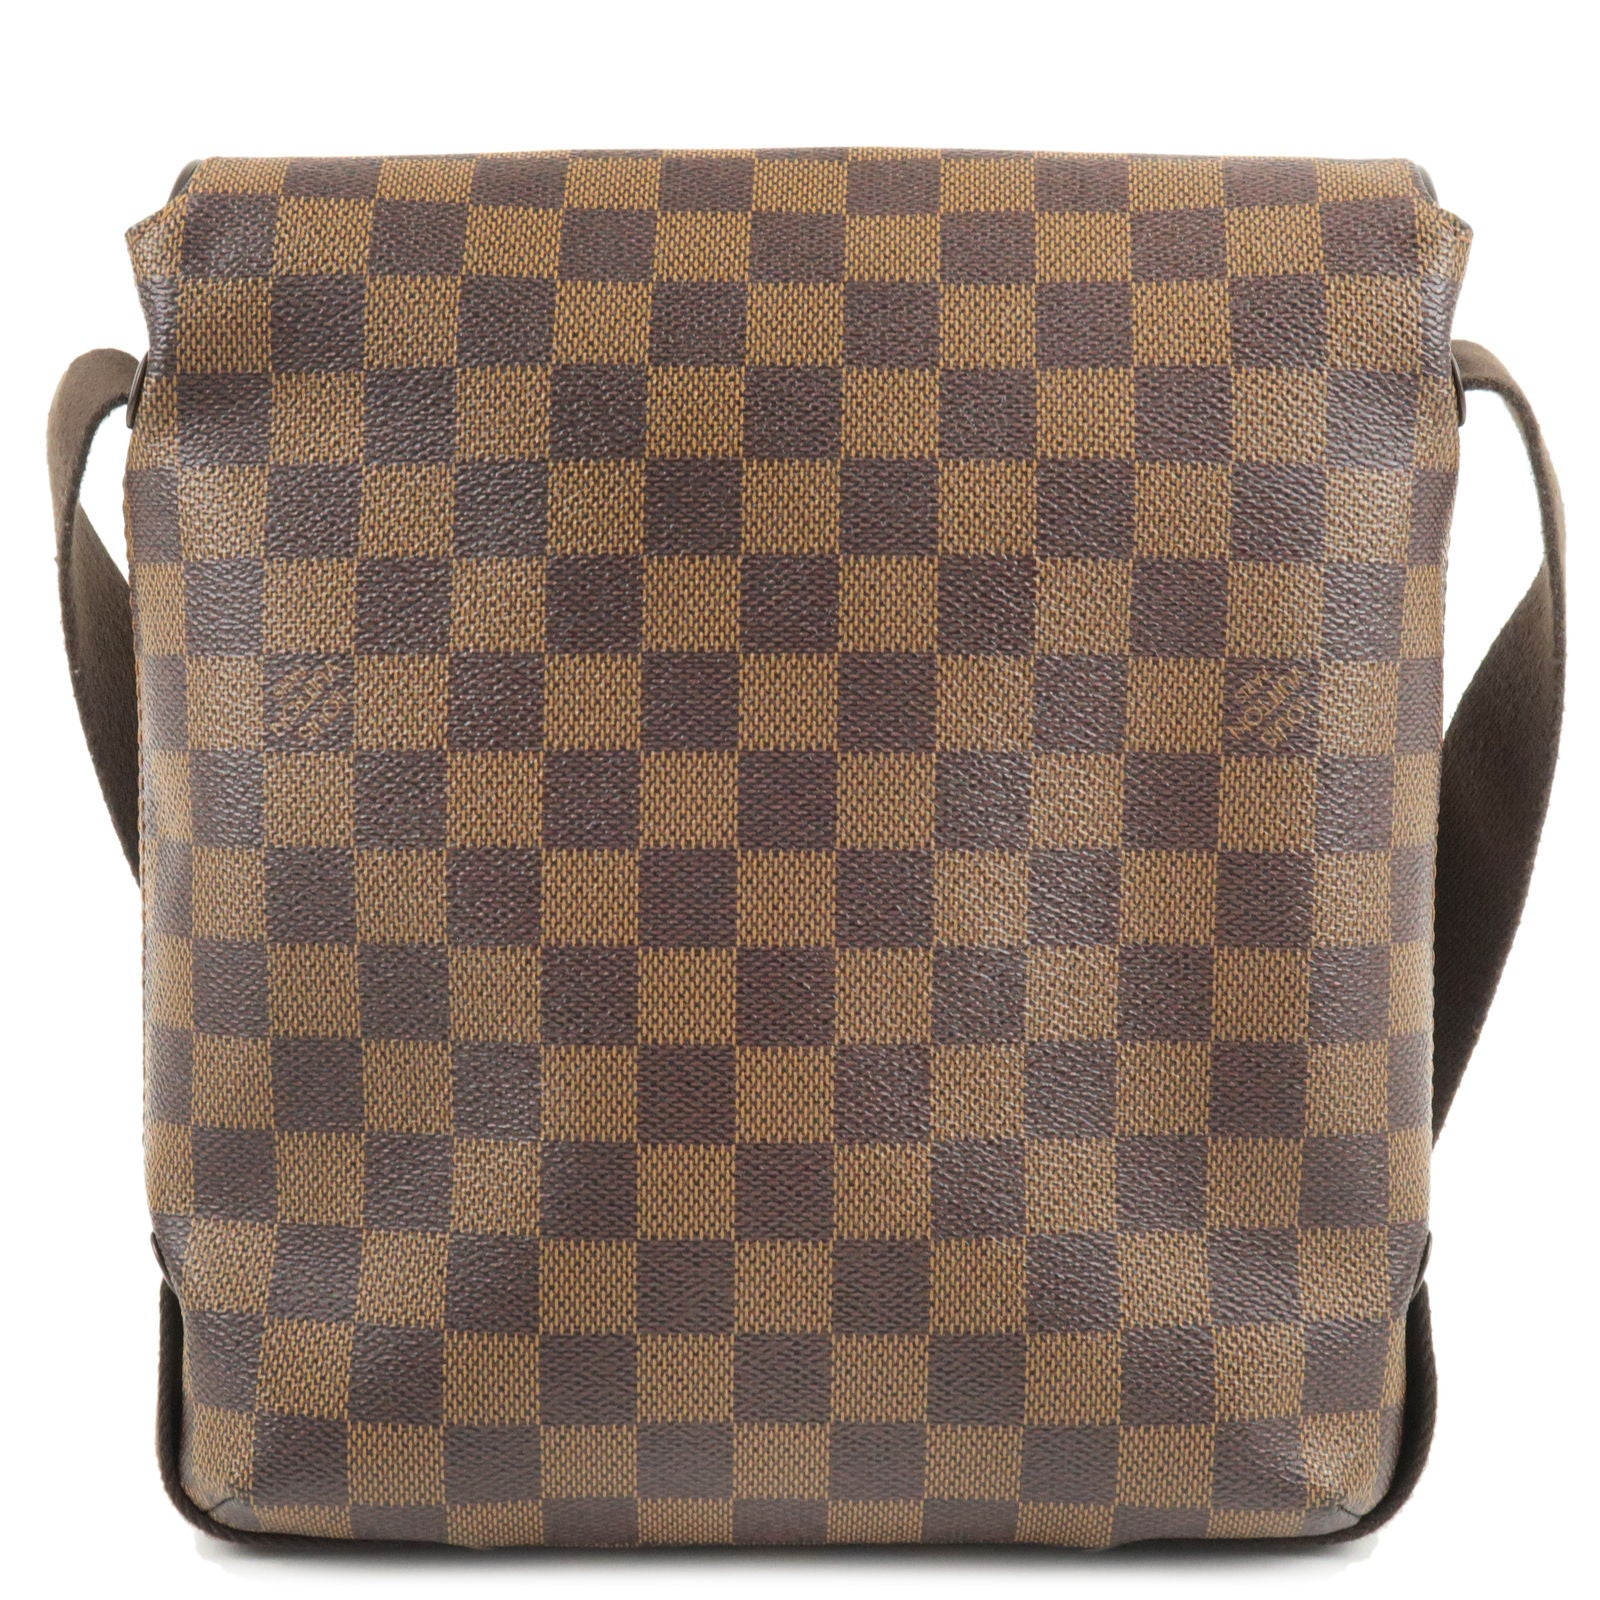 Louis Vuitton Damier Ebene Cosmetic Pouch PM - Brown Cosmetic Bags